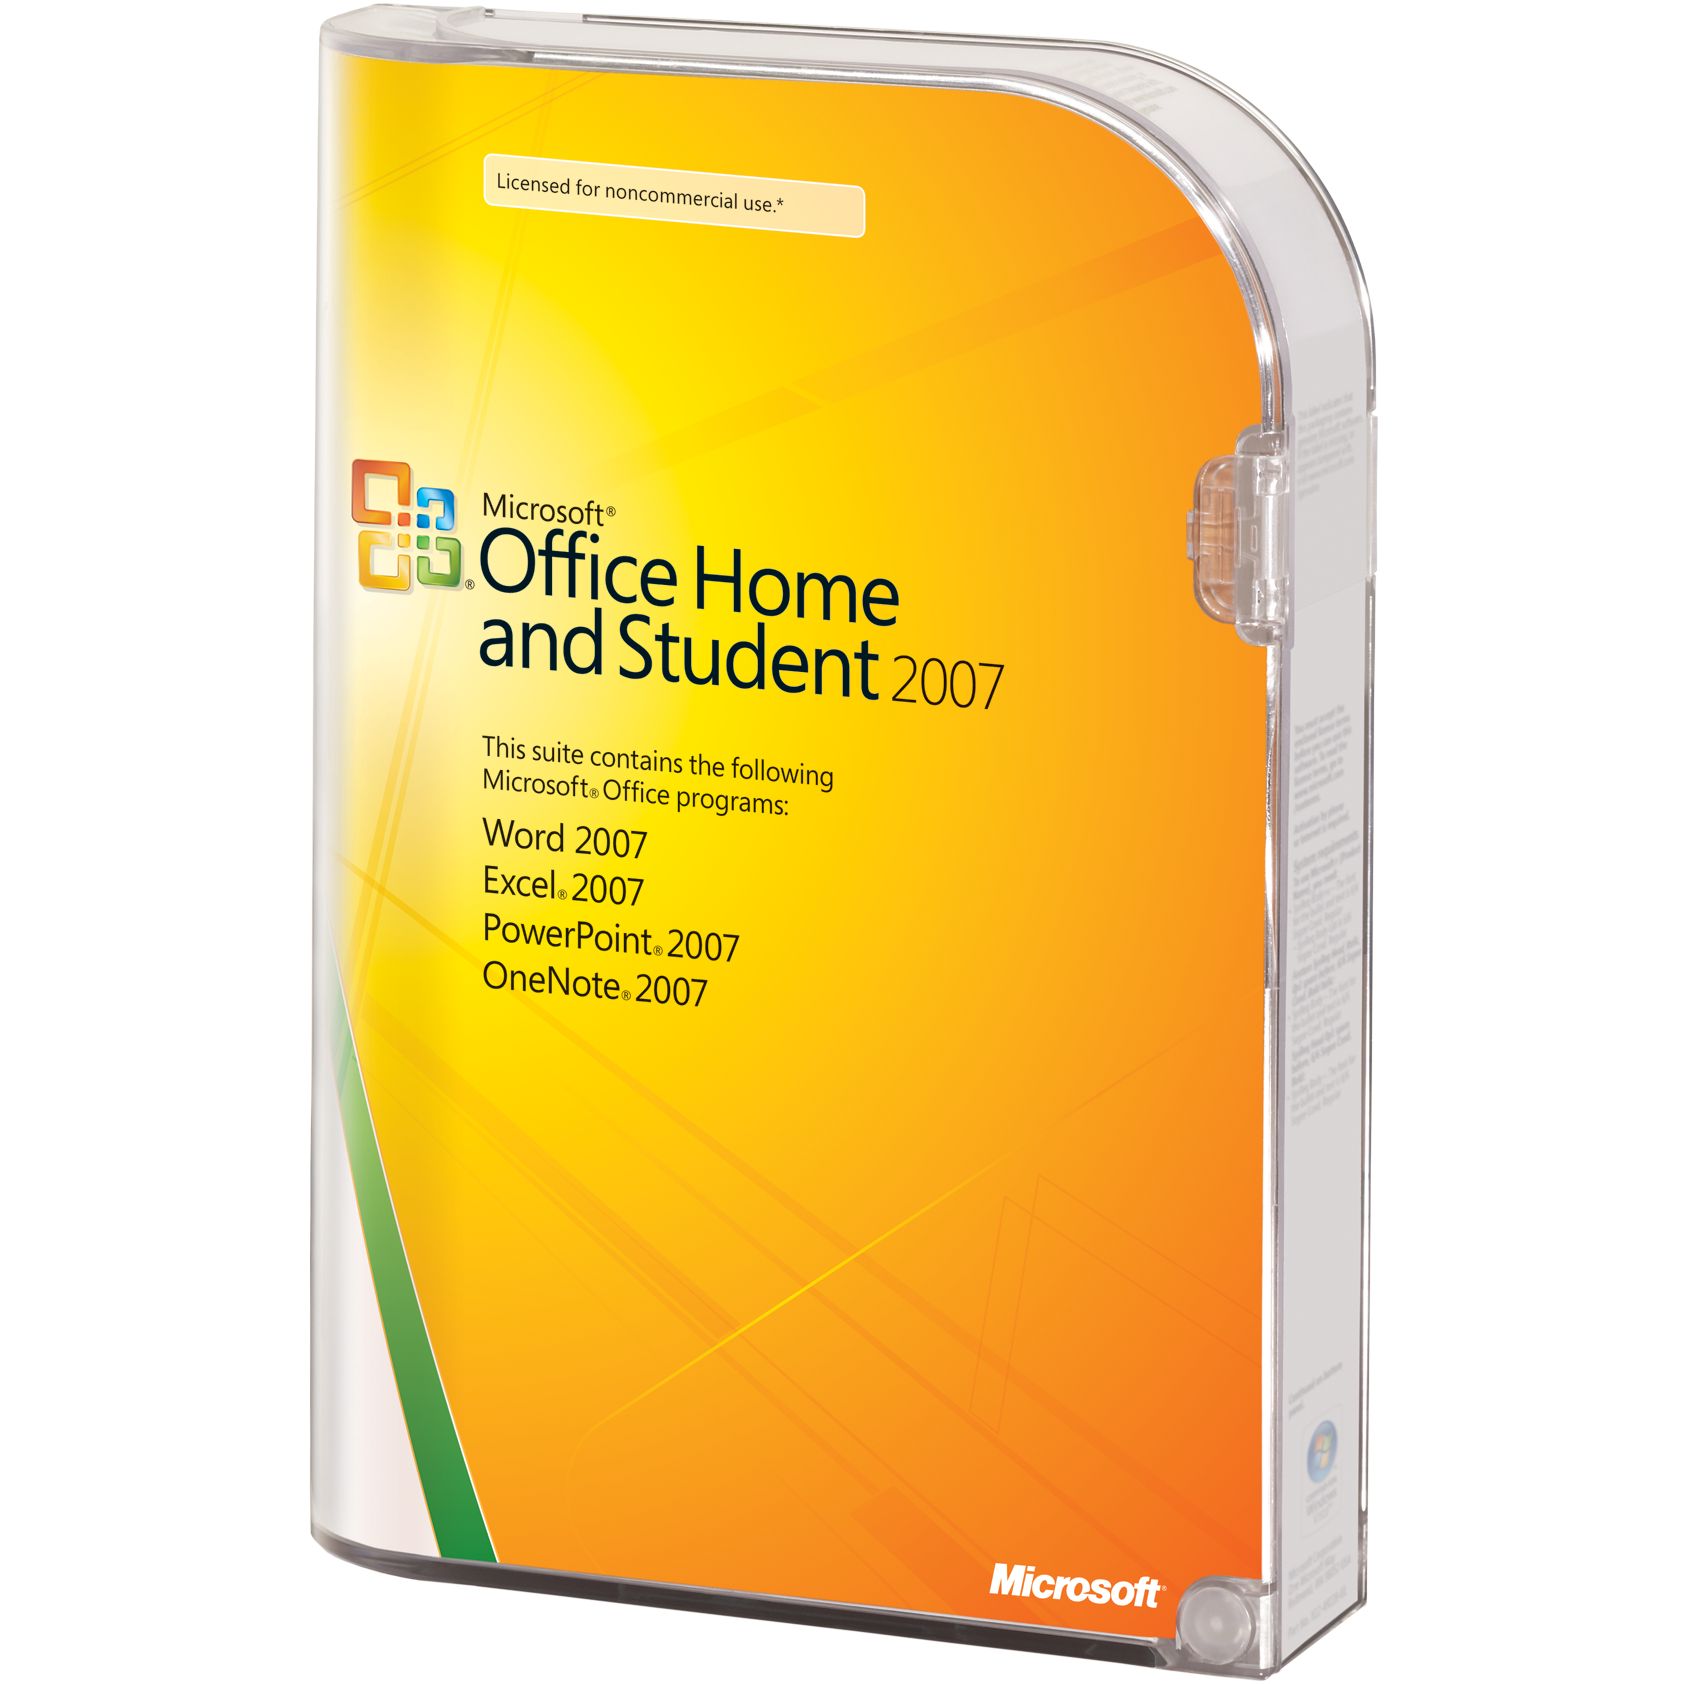 2007 - Microsoft Office 2007 (Full) - Direct Links từ MSDN 230414276?$product$